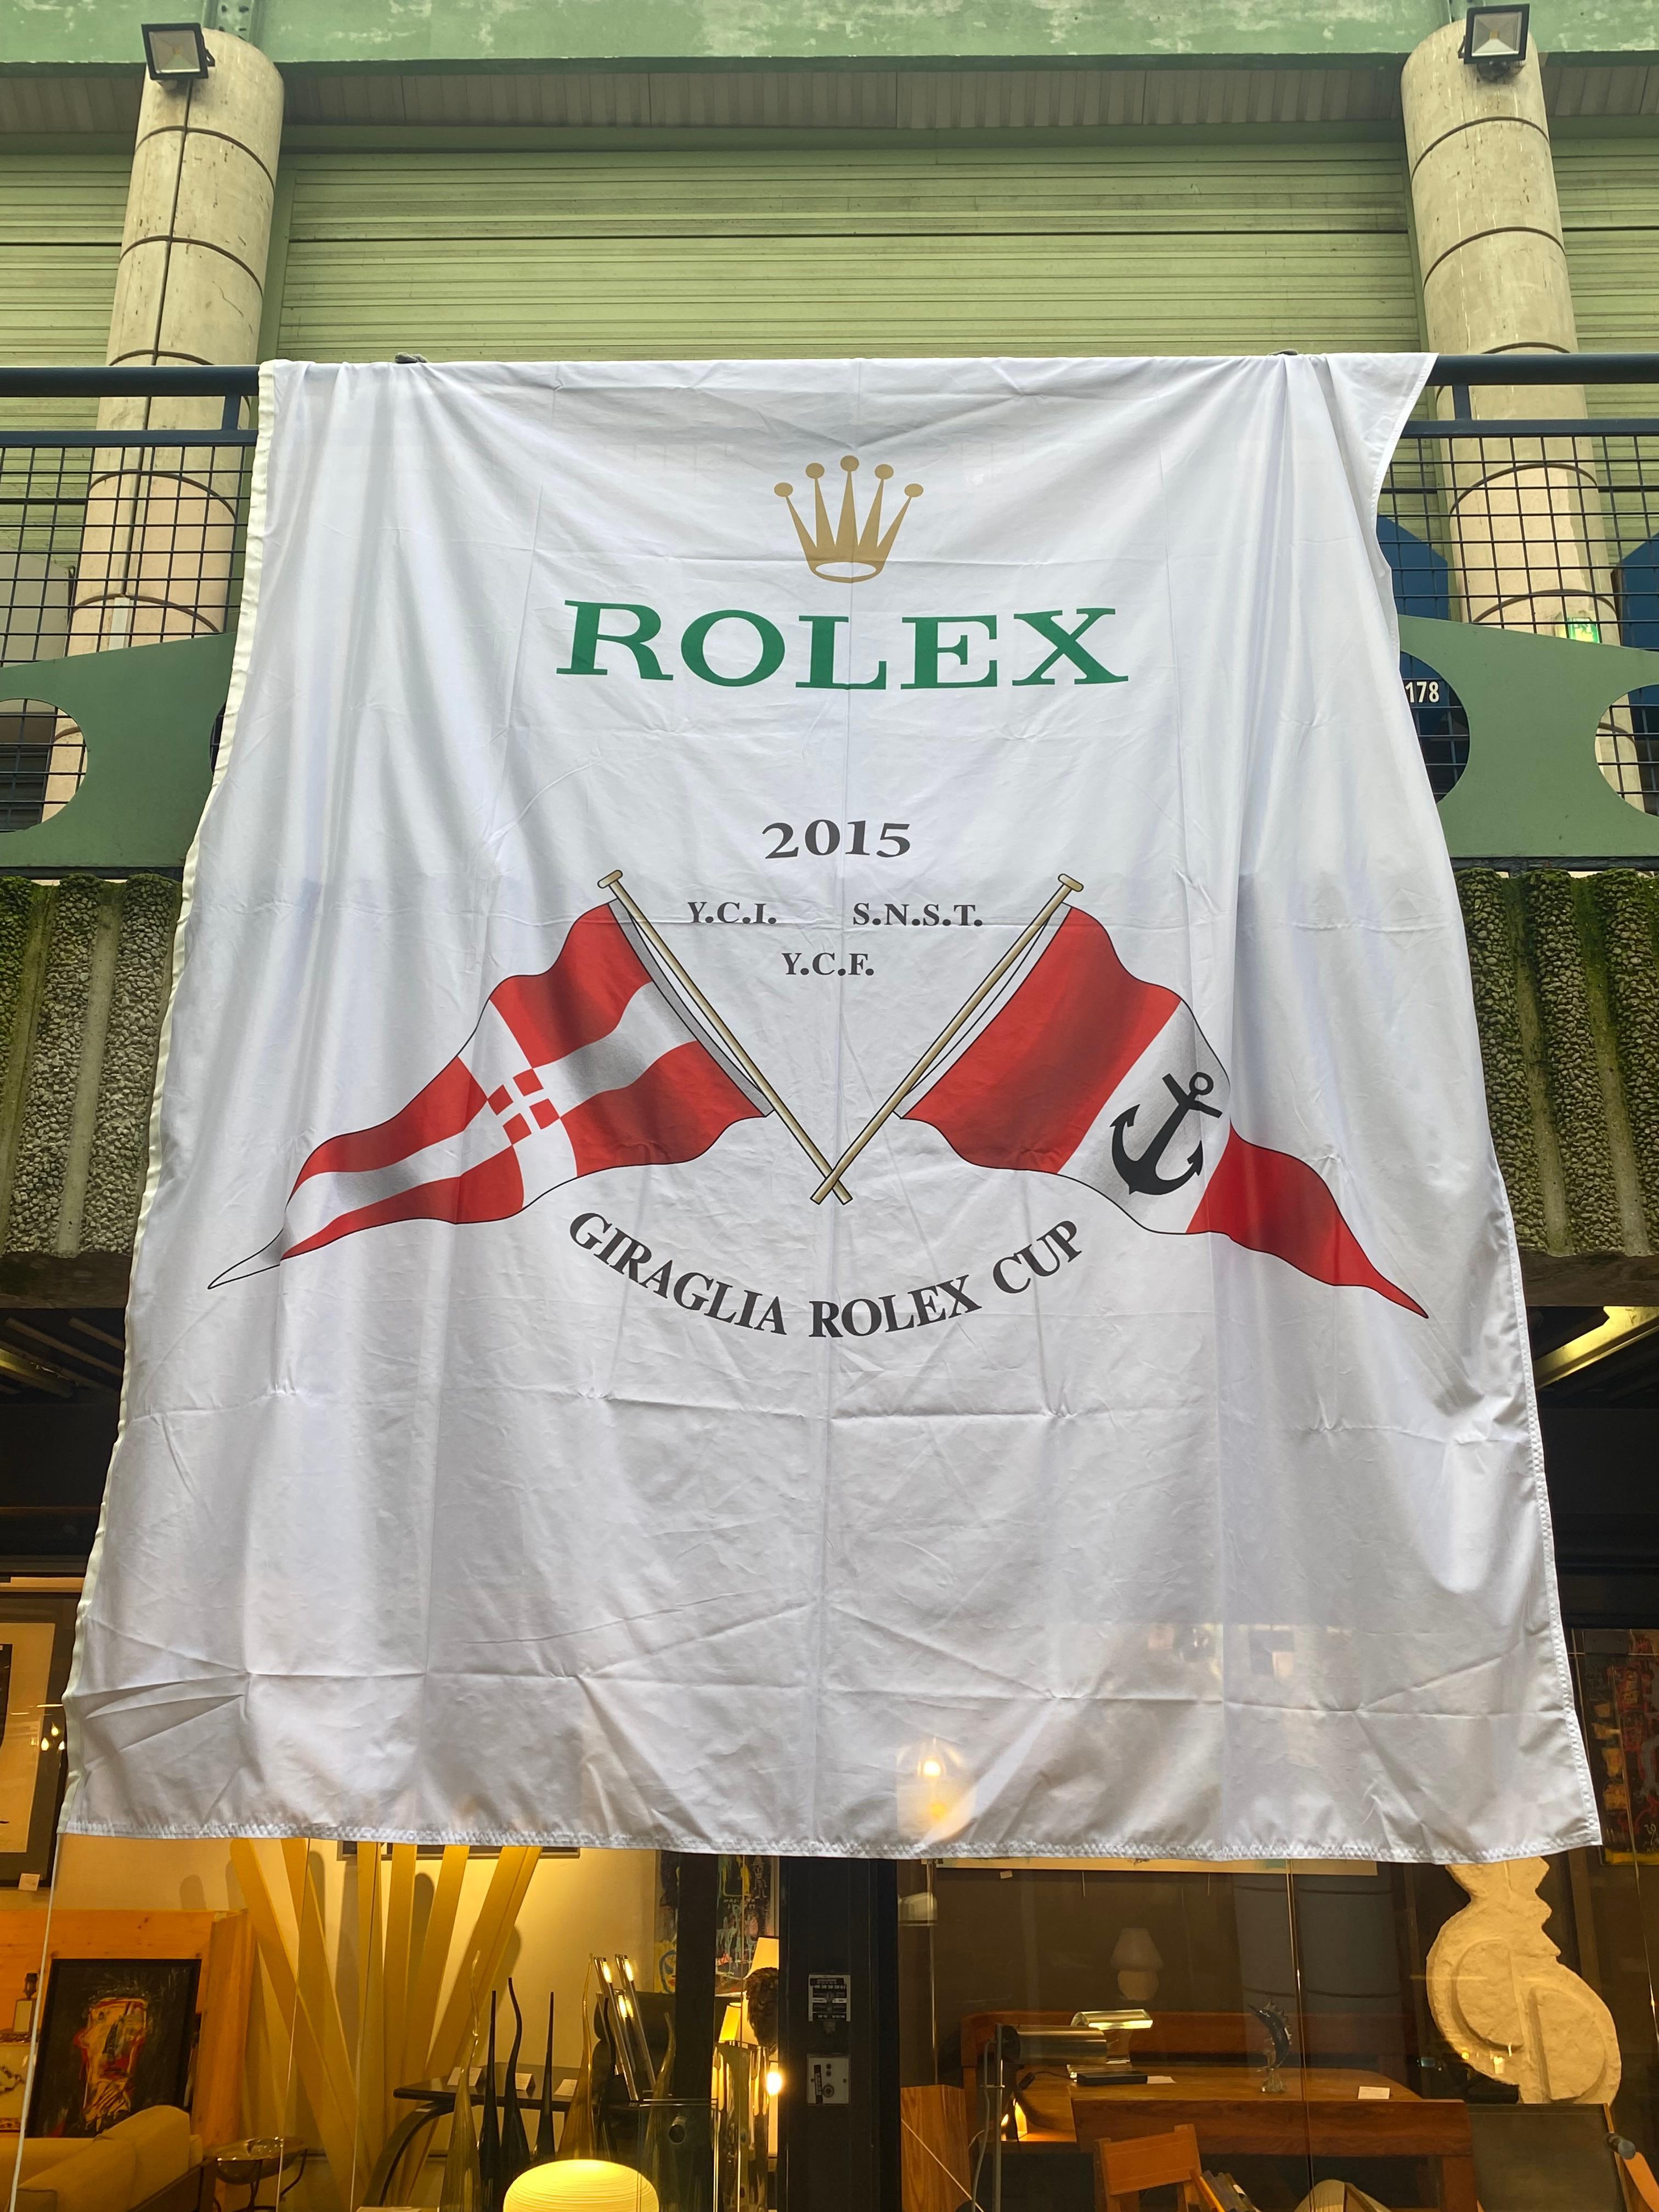 Rolex
Large nylon flag
For the Rolex Cup giraglia
2015
Excellent condition
200 x 225 cm
With its cords
950 euros
In very good condition